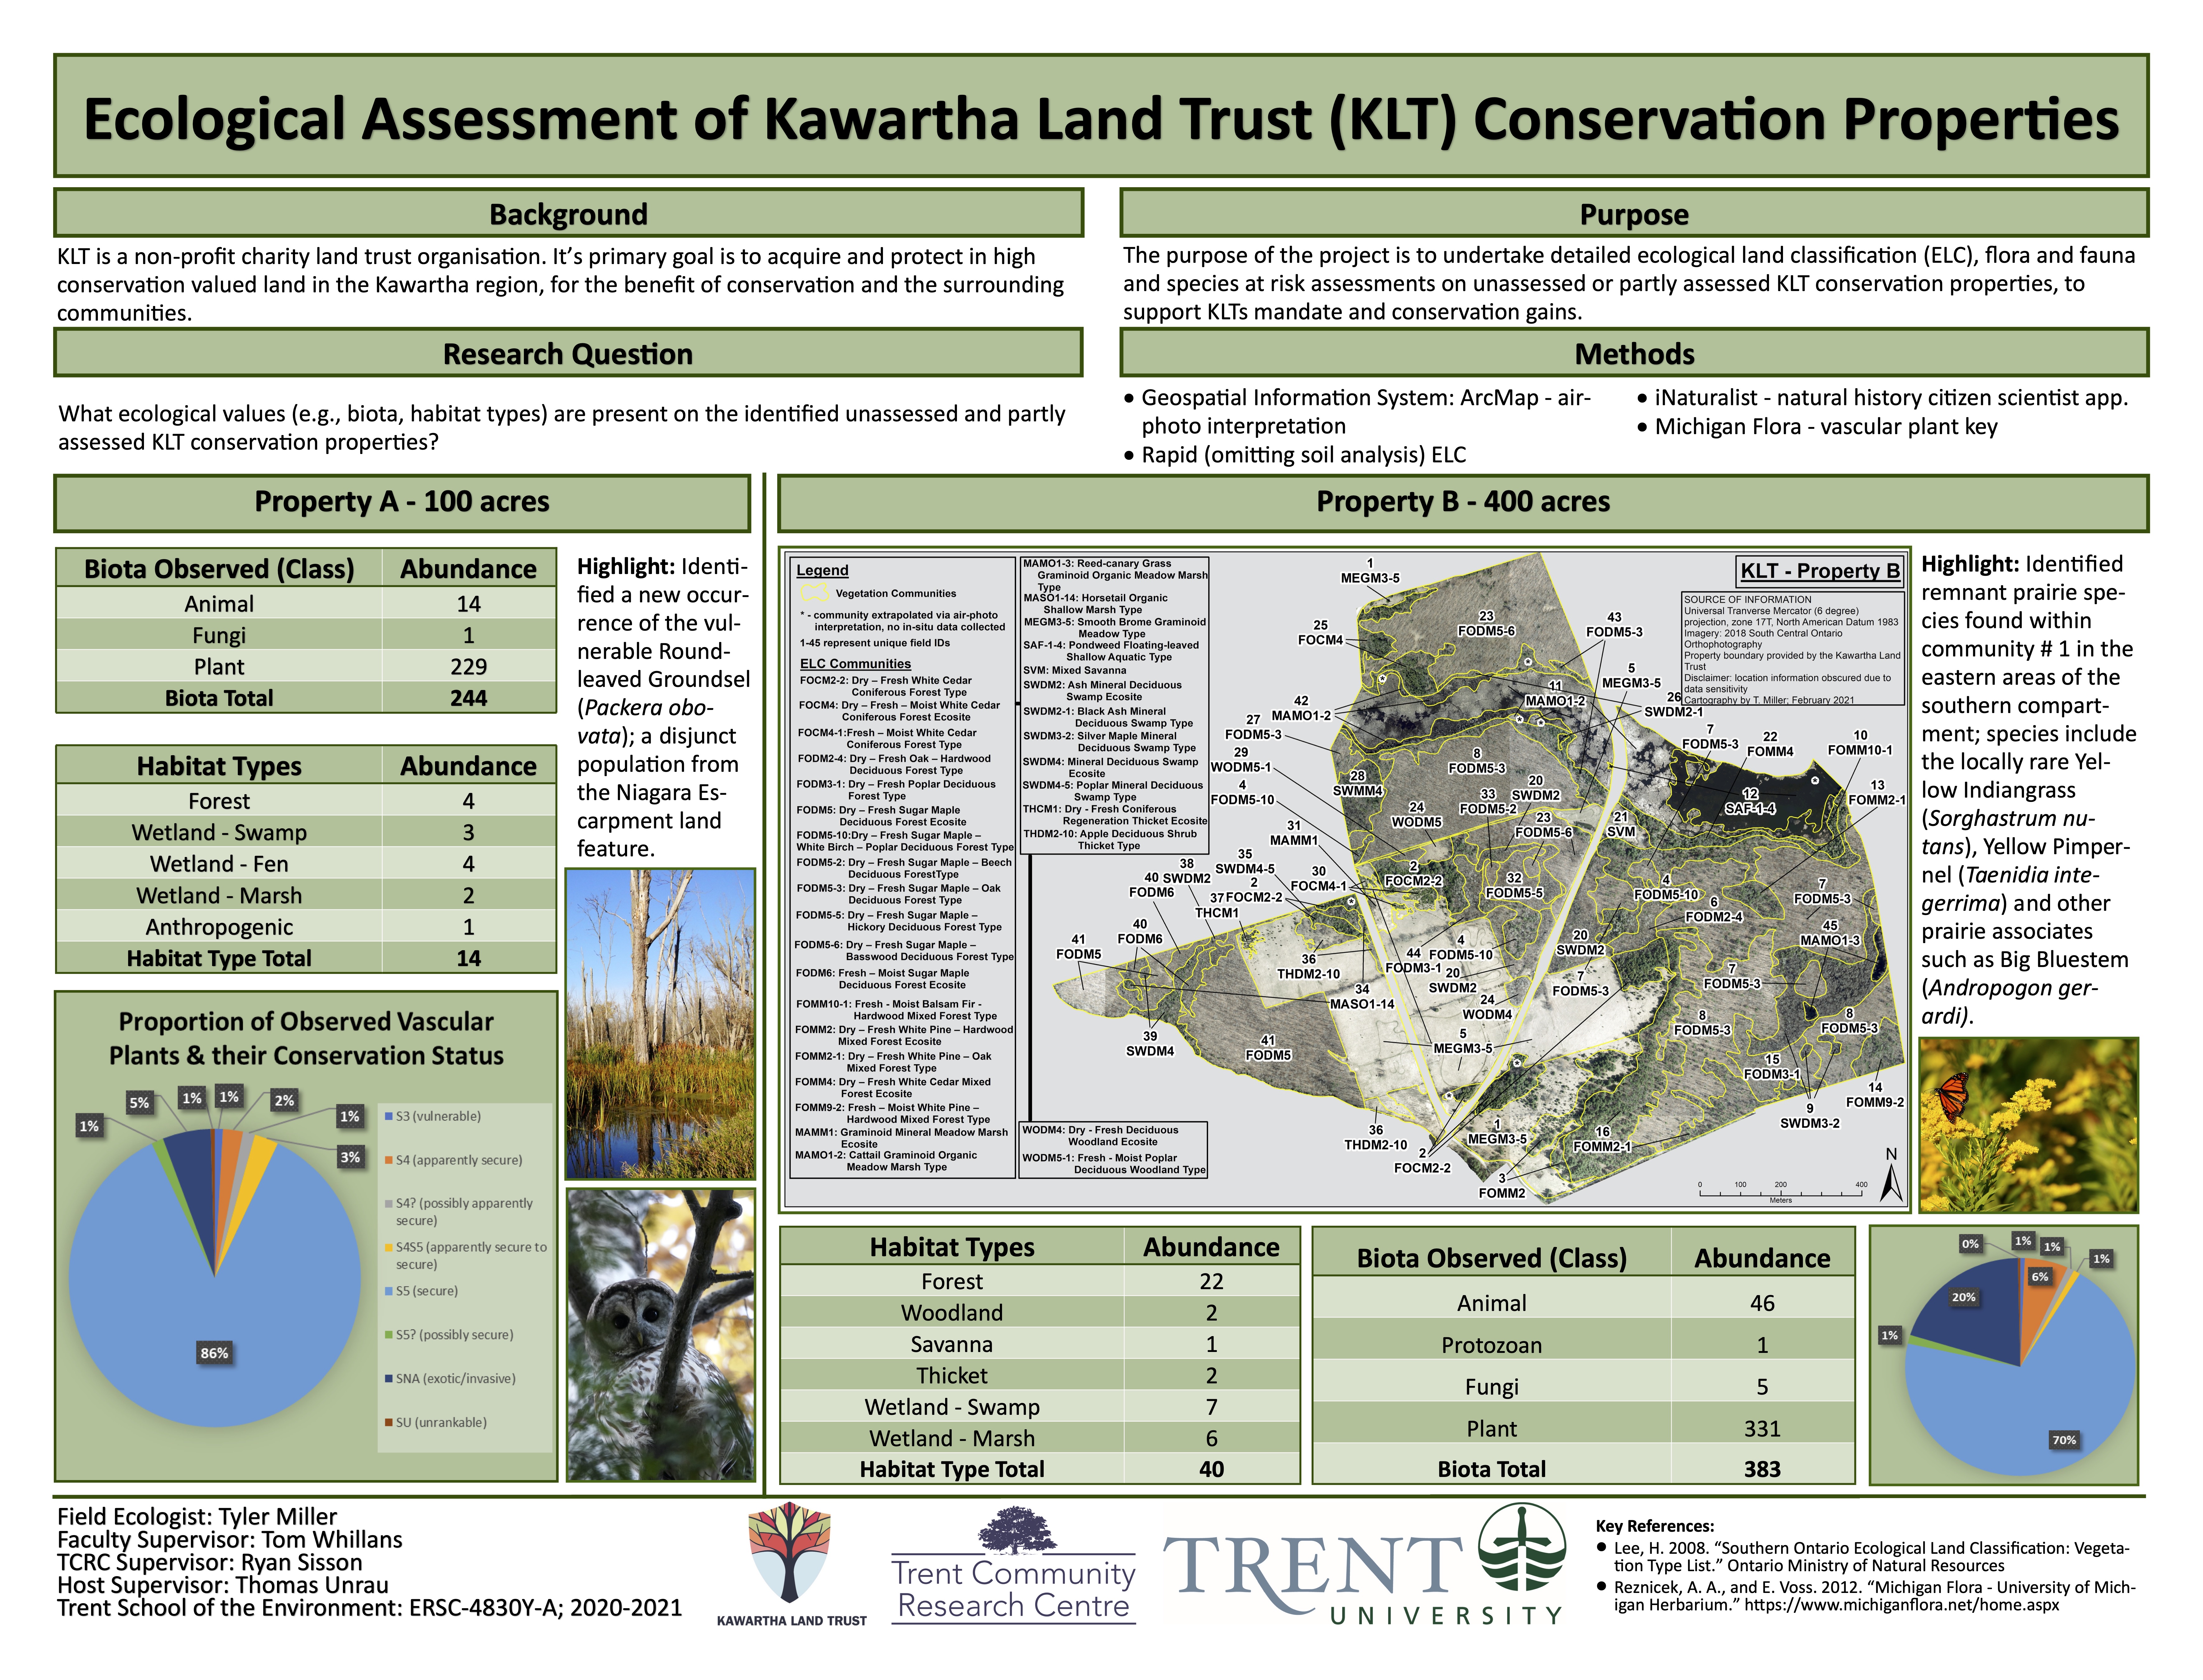 Research Poster for Ecological Assessment of Kawartha Land Trust Conservation Properties